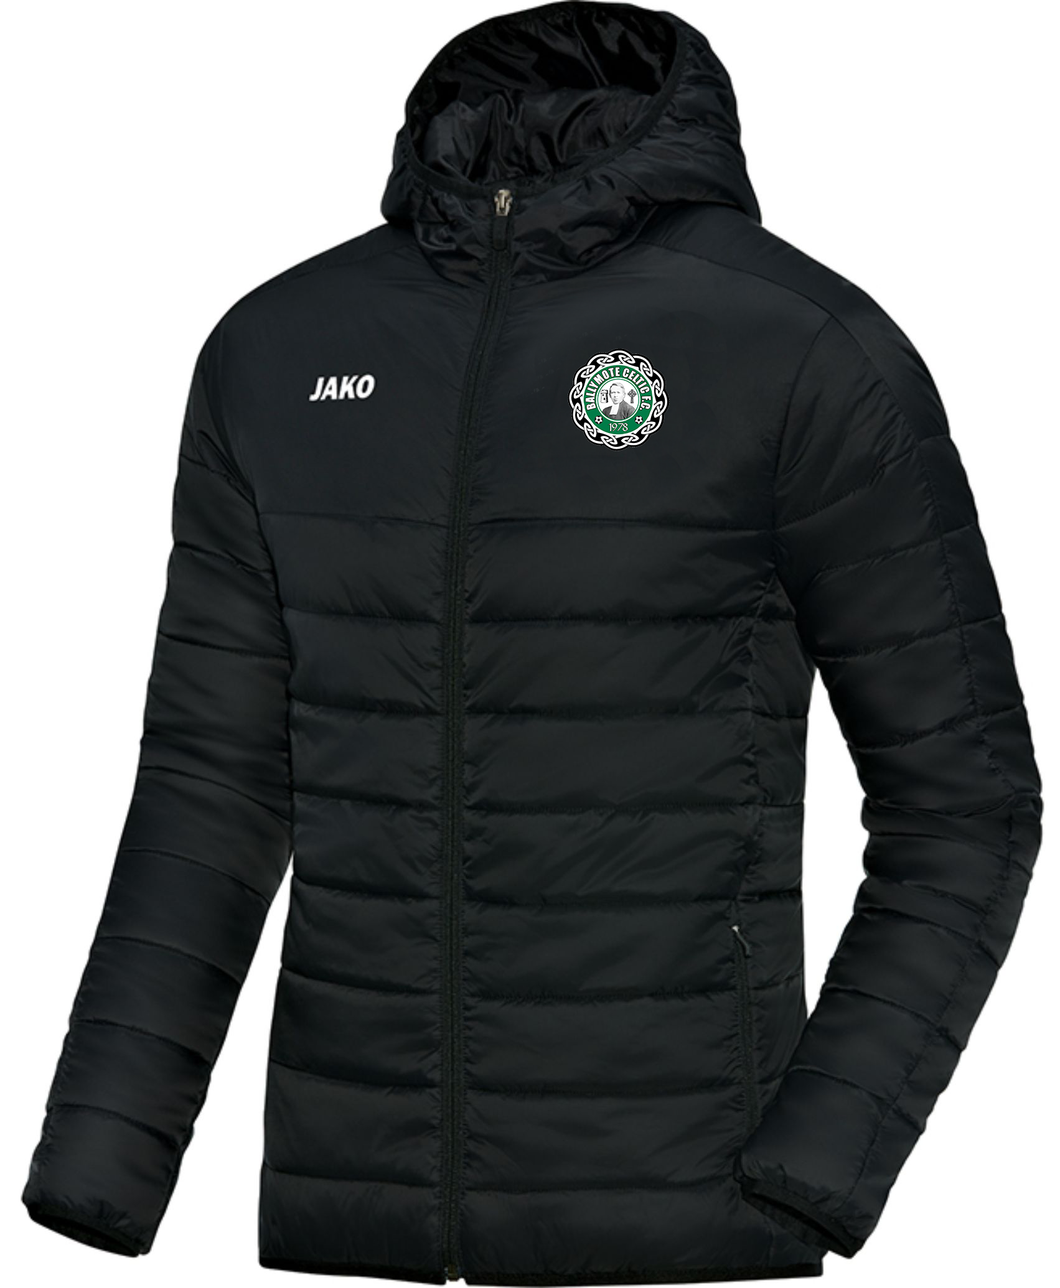 ADULT JAKO BALLYMOTE CELTIC QUILTED JACKET BC7204